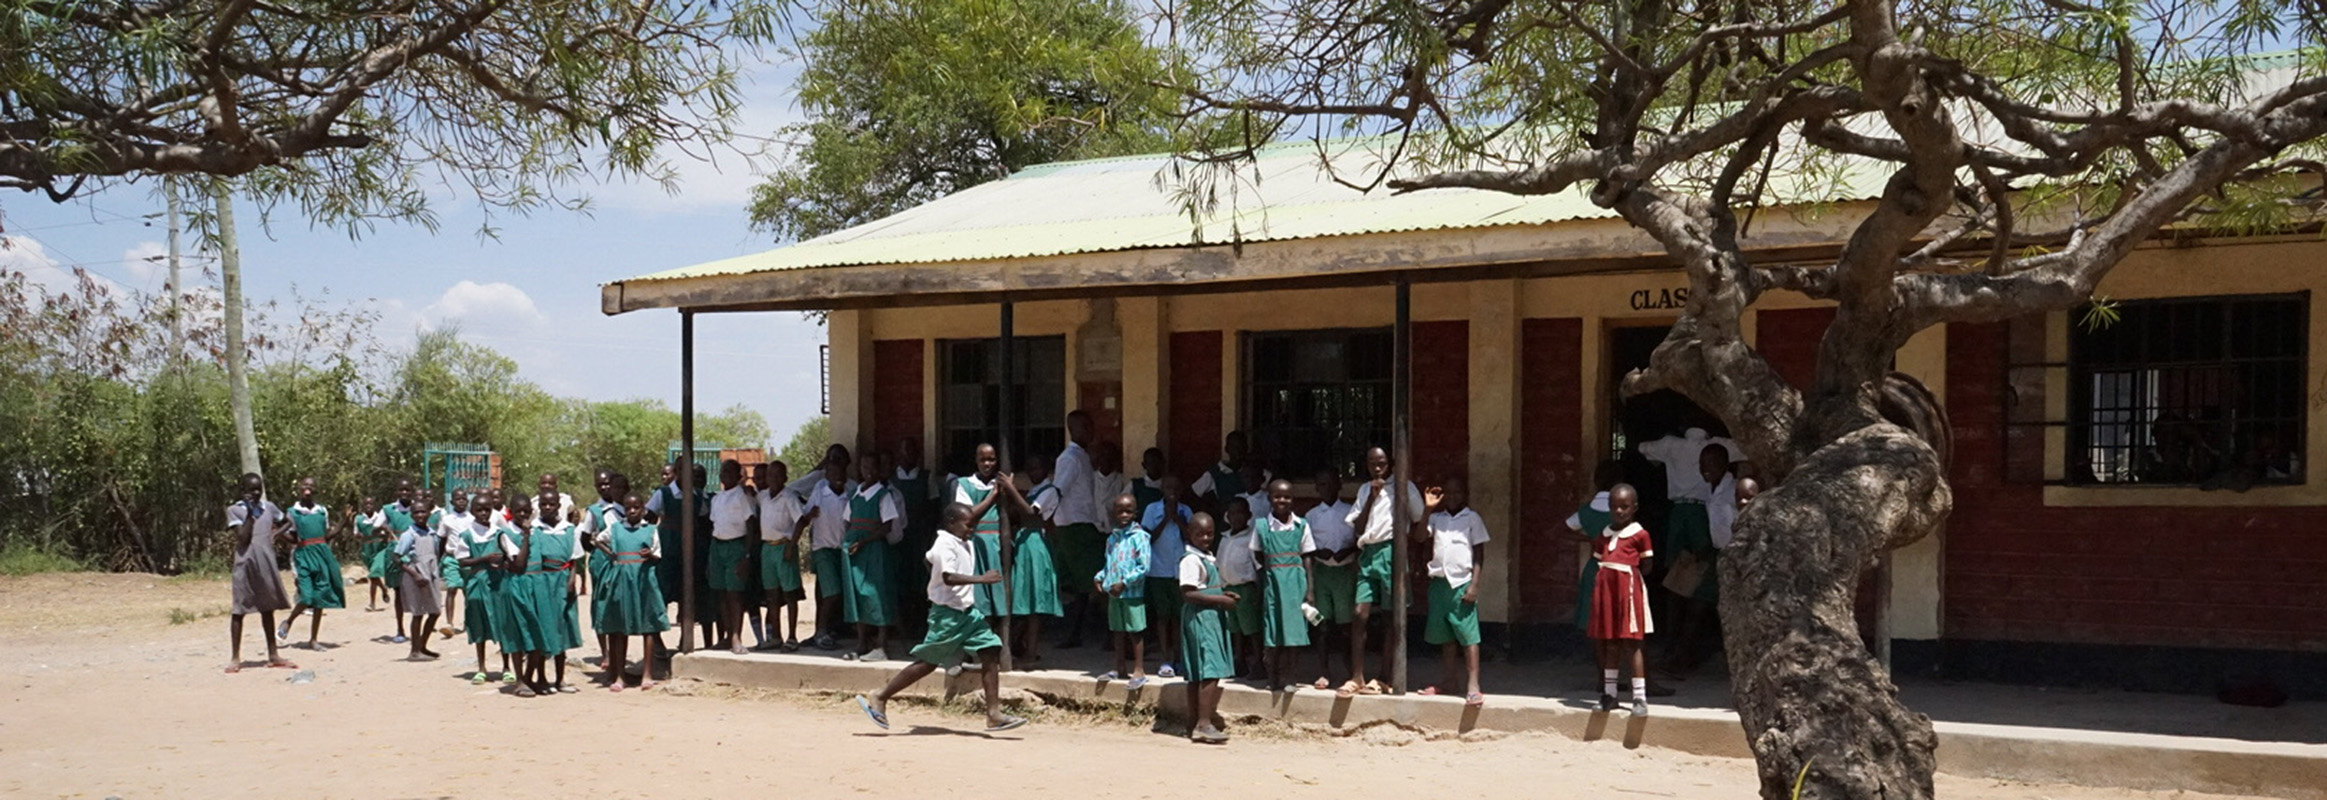 Students in green uniforms gather outside their school in Kenya, a central hub for education and community engagement thanks to reliable water access.